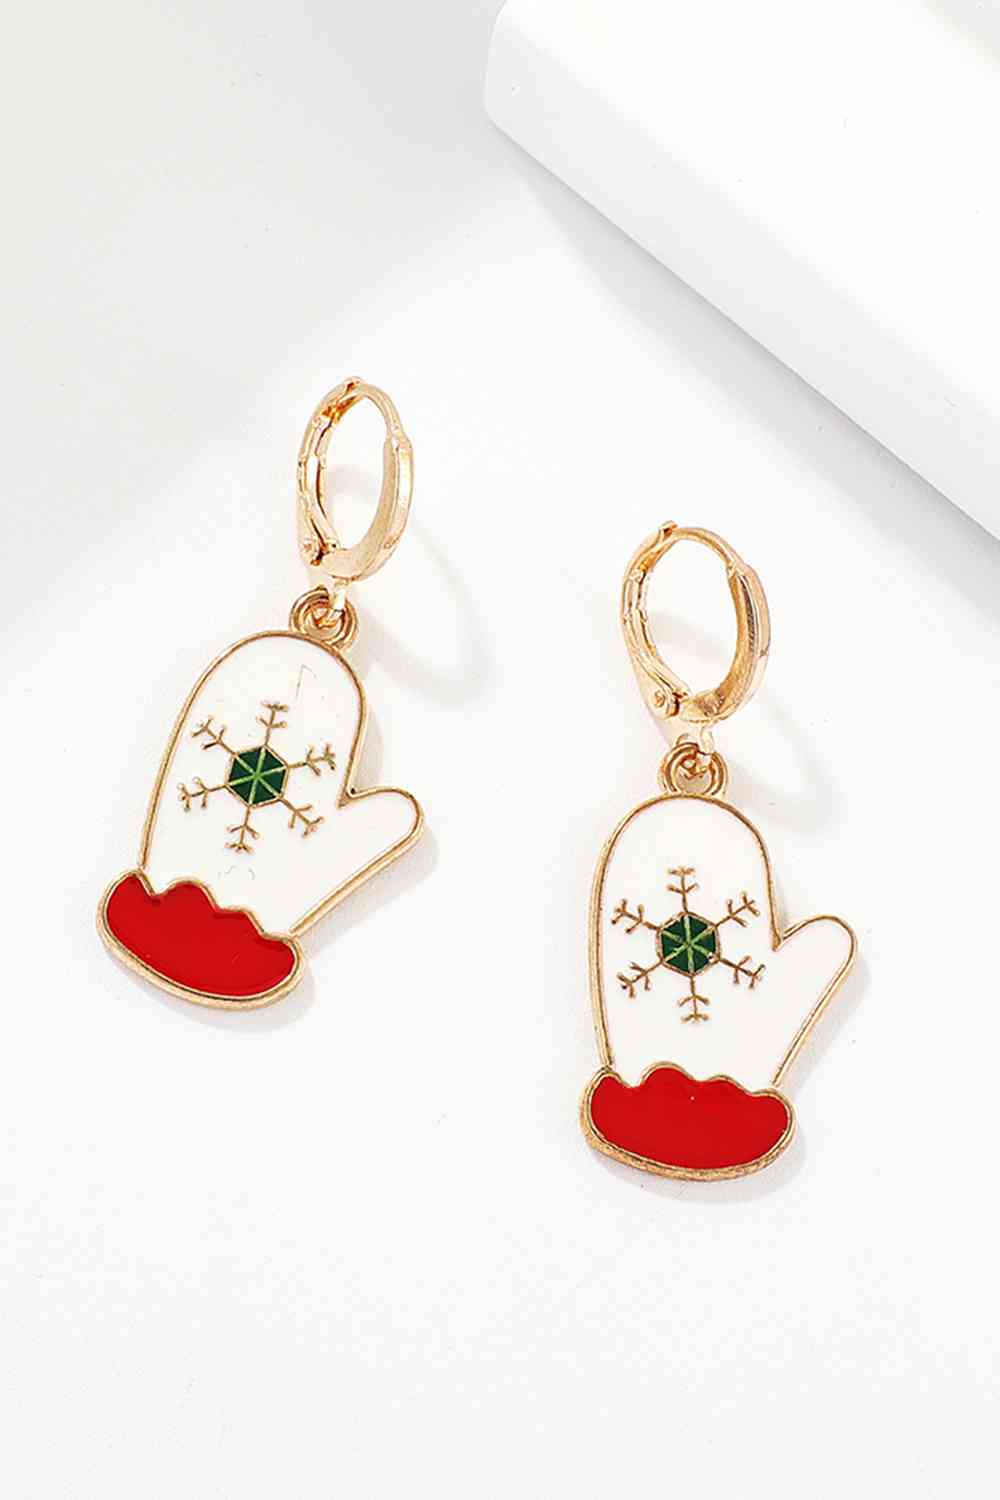 Christmas Theme Alloy Earrings - Kawaii Stop - Alloy earrings, Celebration earrings, Christmas, Christmas earrings, Christmas fashion, Christmas gifts, Christmas outfit, Elegant earrings, Festive accessories, Holiday glam, Holiday jewelry, Holiday party accessories, Holiday season, Ship From Overseas, Sparkling jewelry, Stylish earrings, Y.Q@Jew